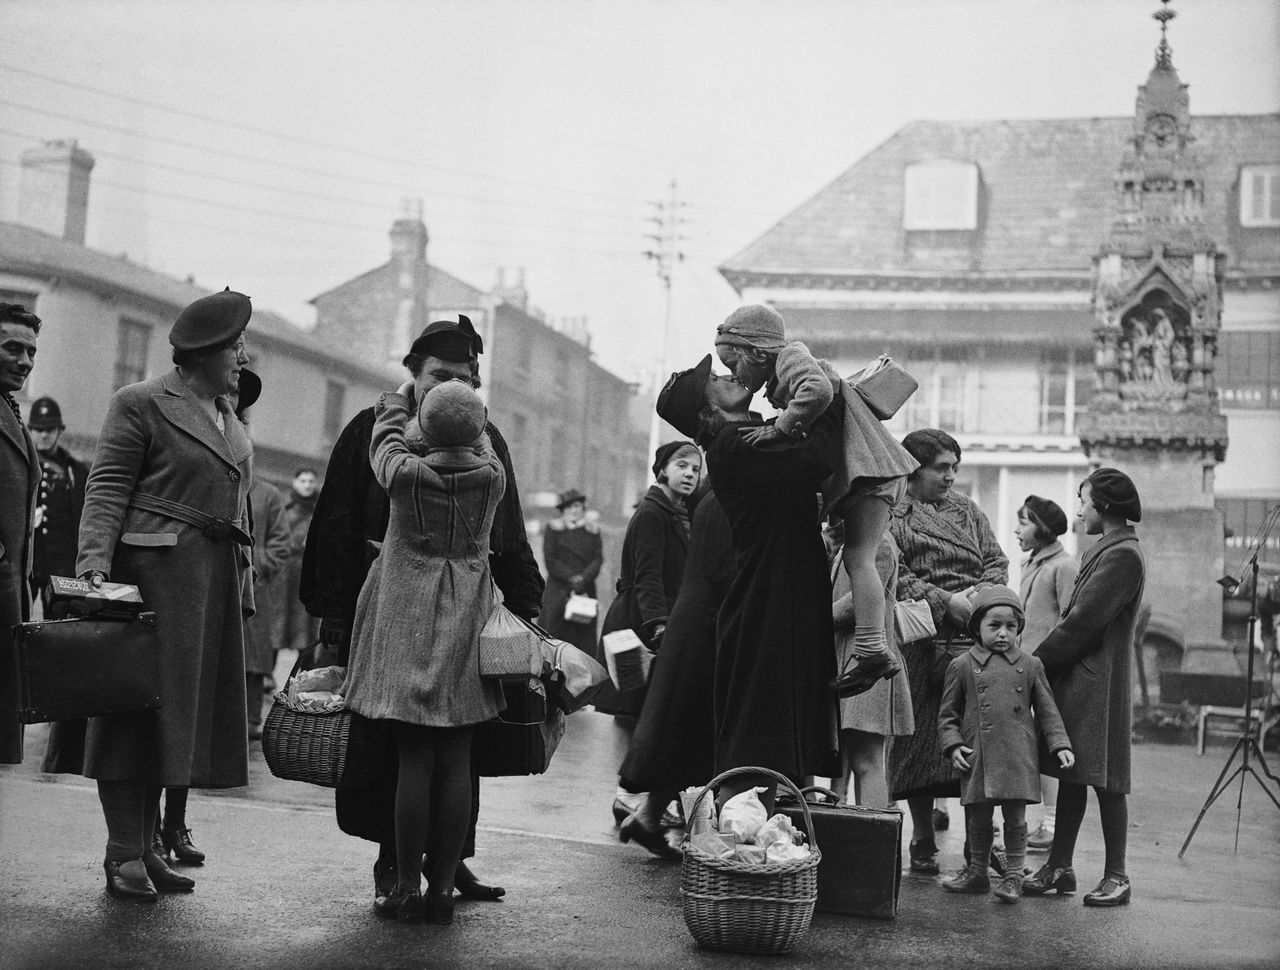 Parents from London are reunited with their evacuated children in Saffron Walden, Essex, during World War II, 22nd October 1939. Nearly 1,000 parents attended the reunion party, hosted by the Mayor of the town.